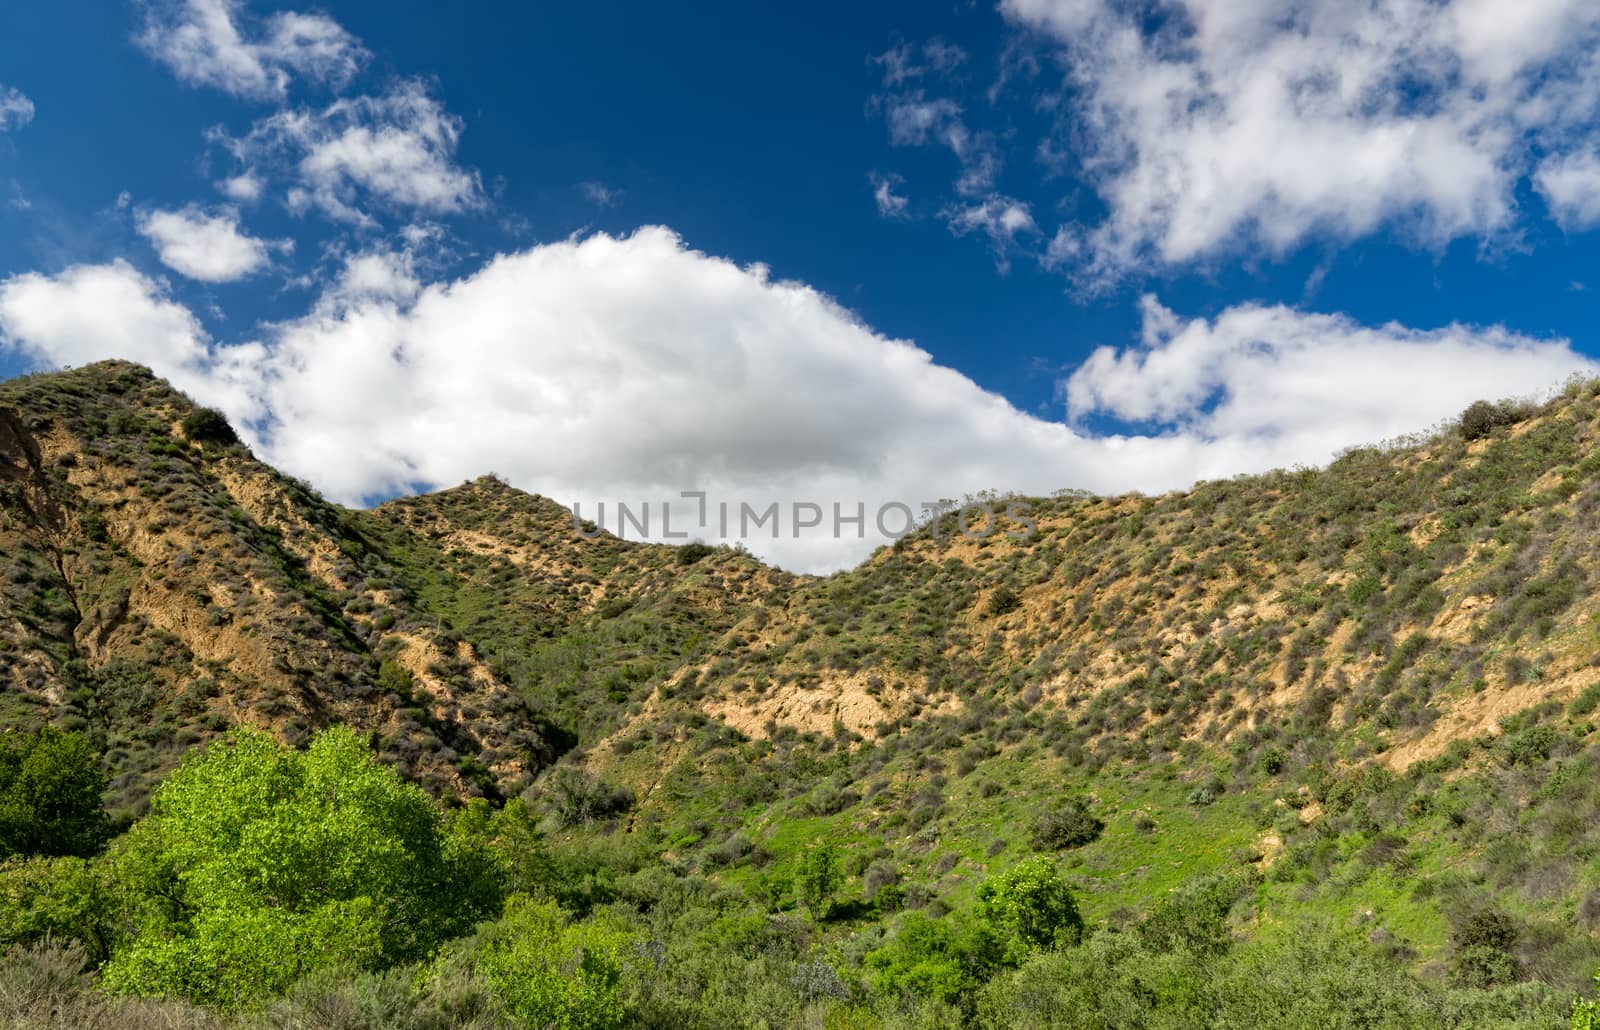 Mountains at Towsley Canyon in Southern California by wolterk